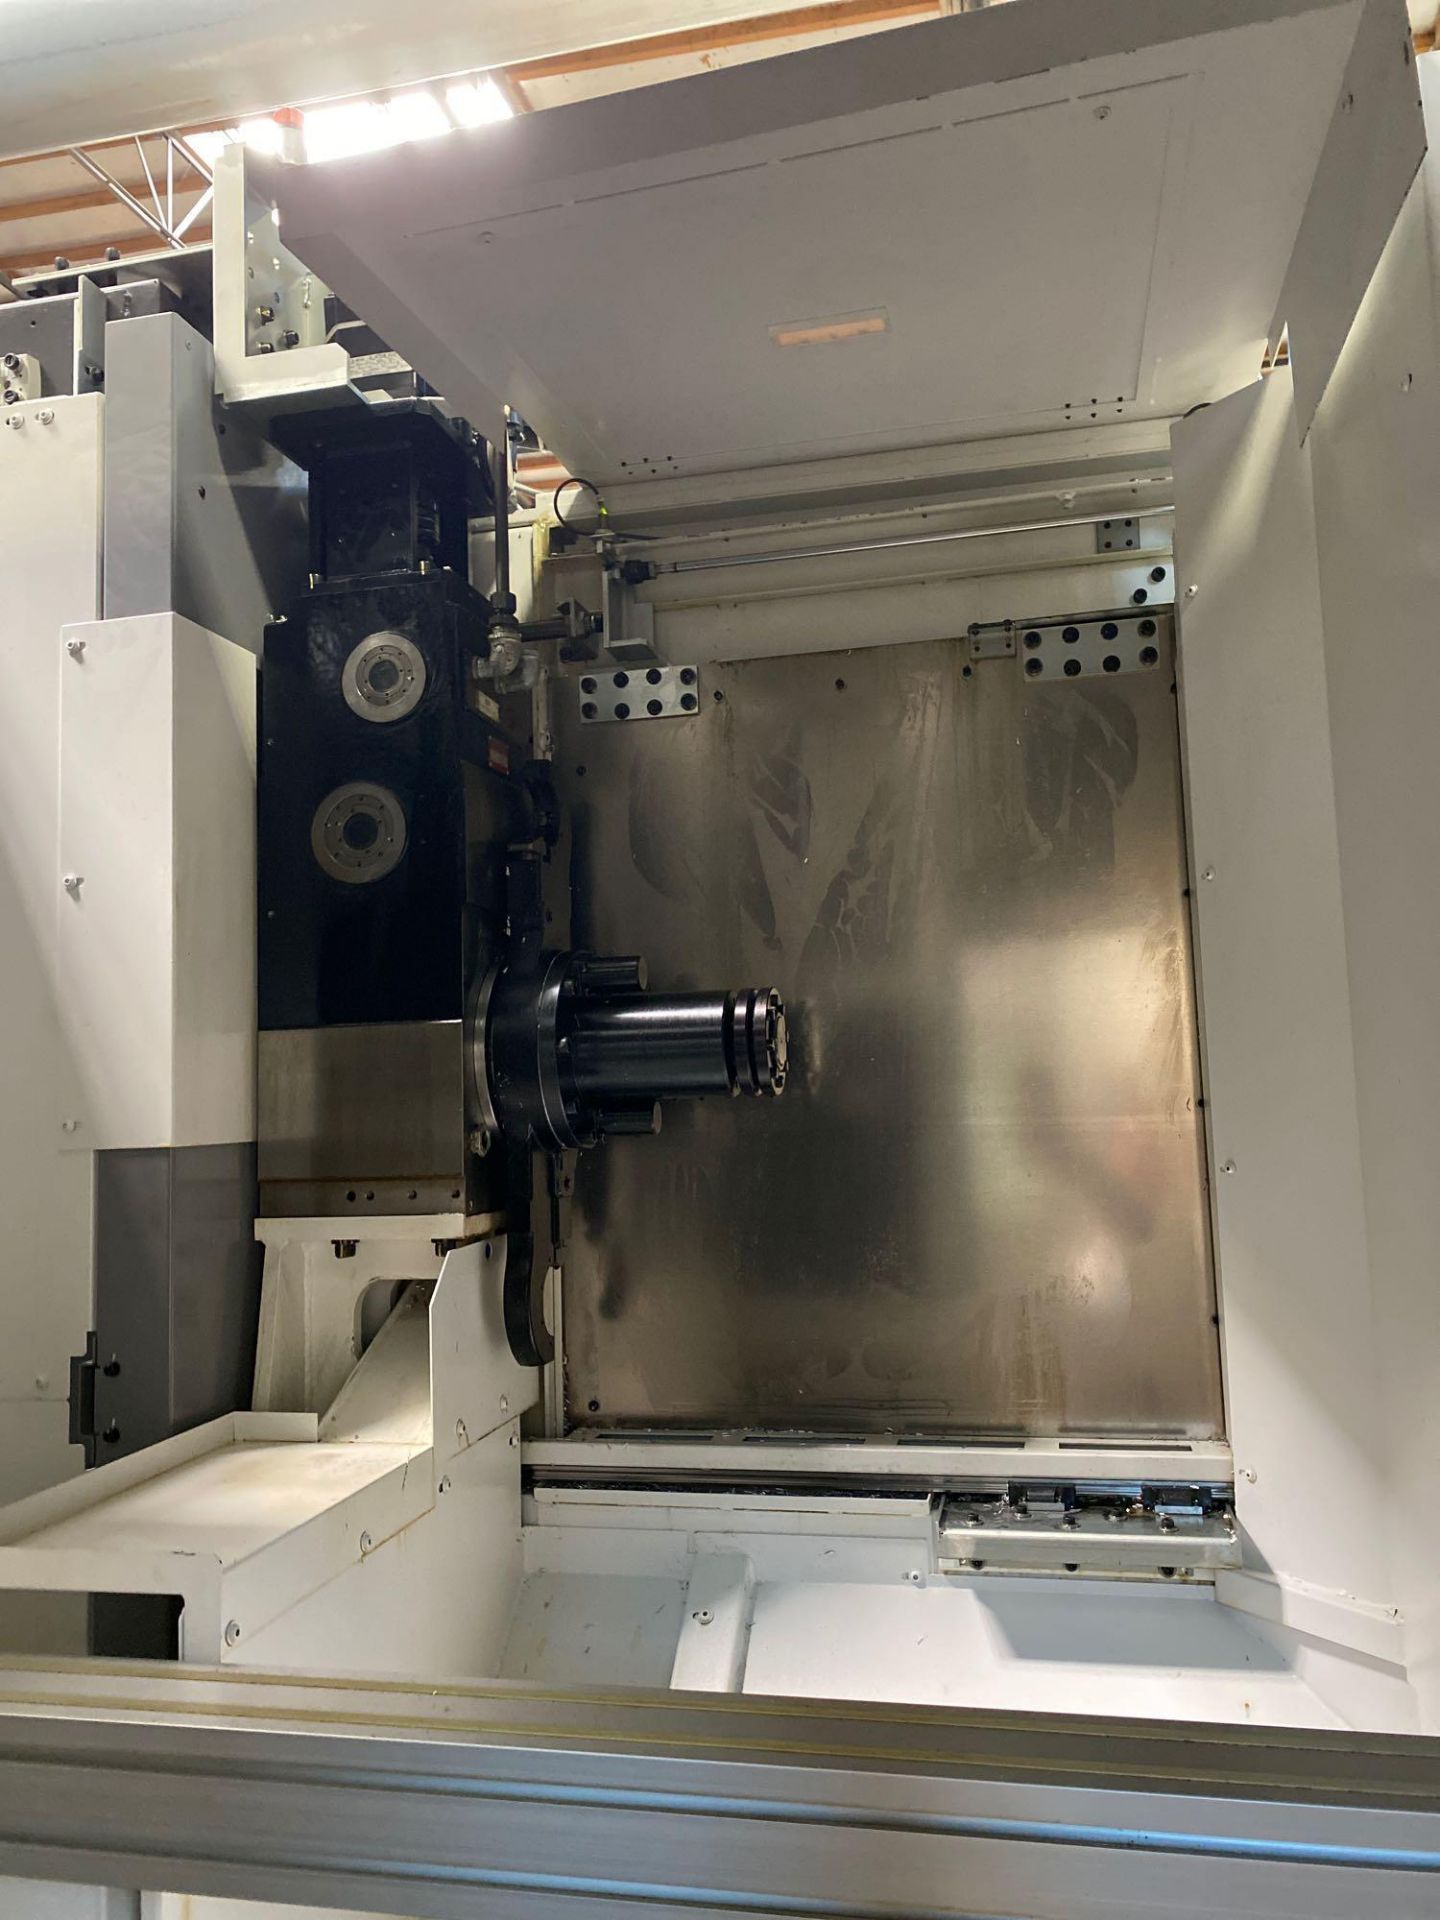 (2) Okuma MB-5000H 4-Axis HMC in F.M.S., OSP-P300MA Ctrl., 30” x 30” x 30” Travels, New 2018 - Image 15 of 32